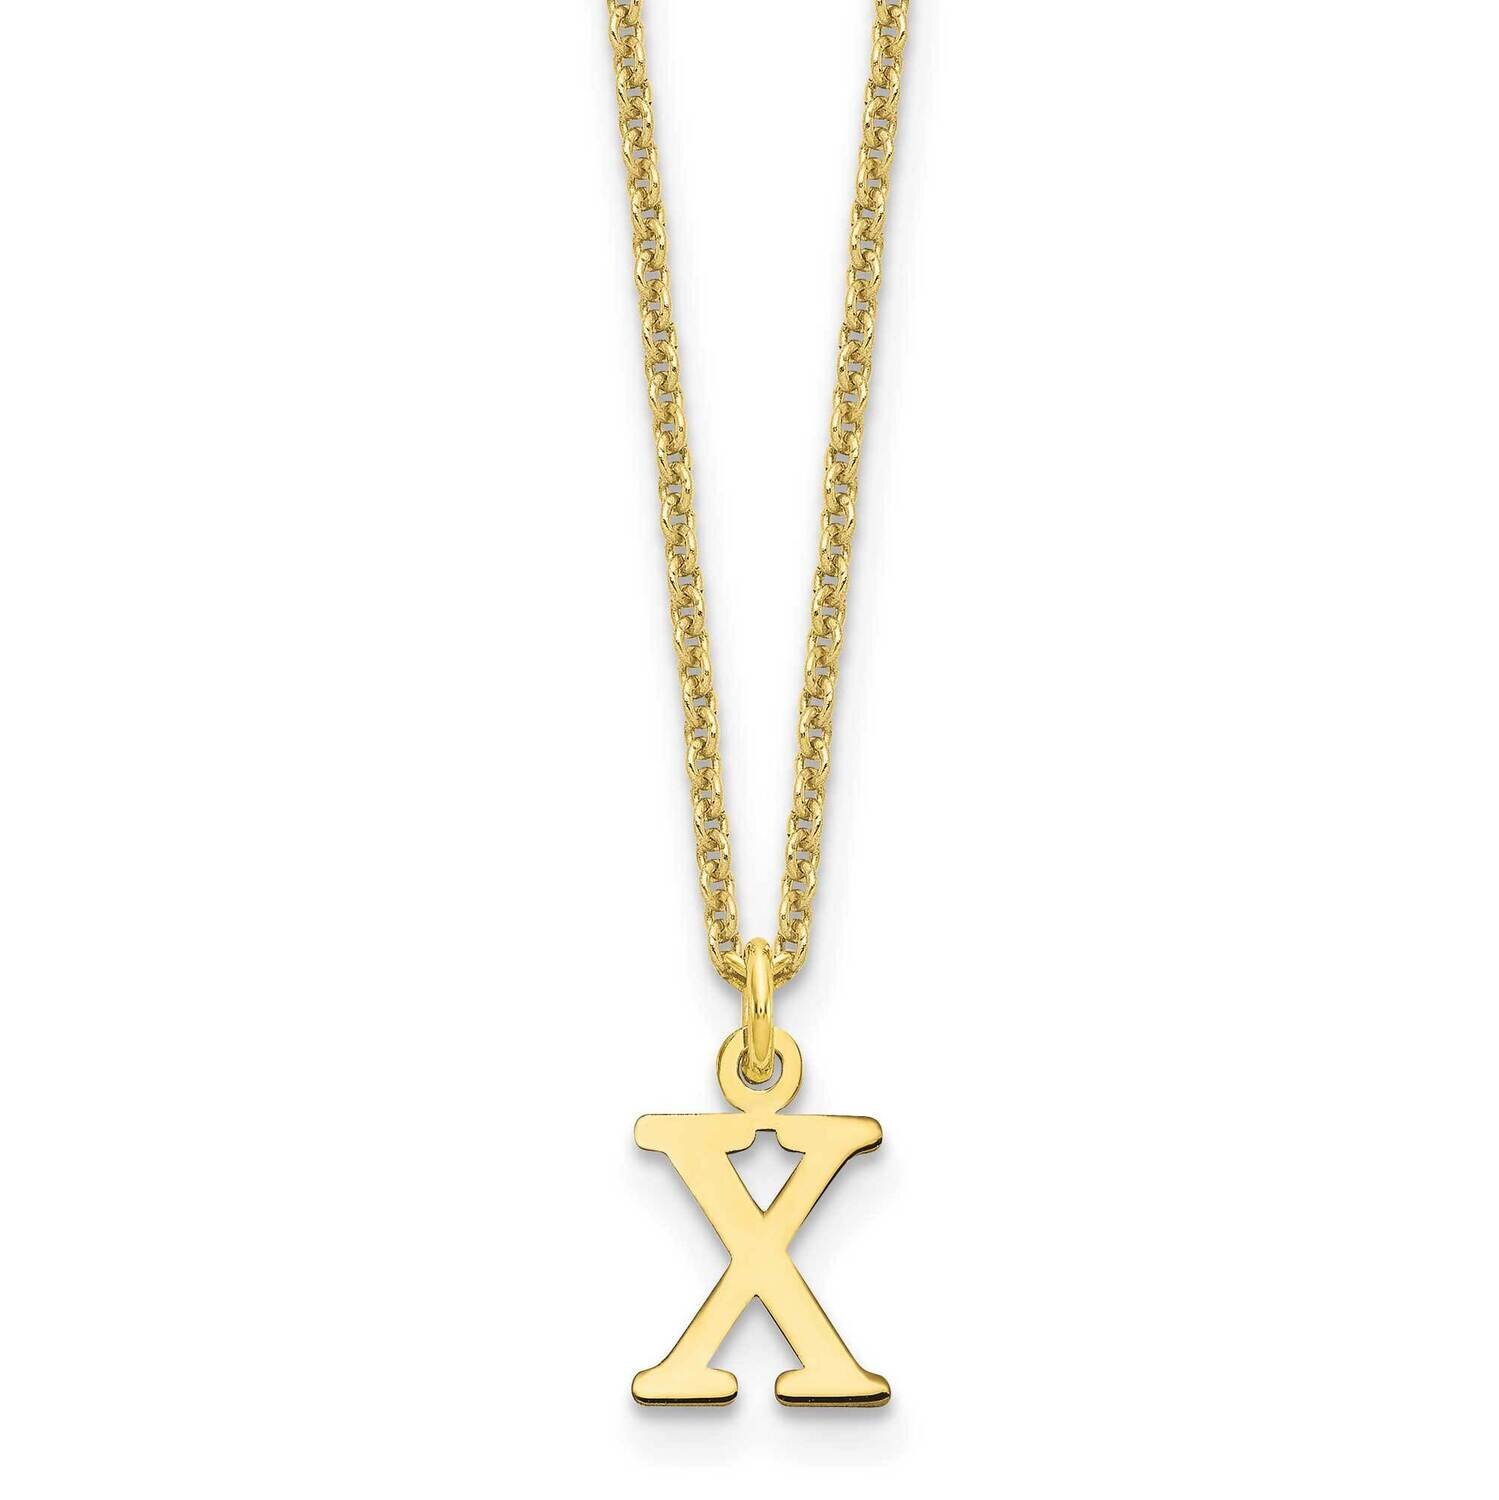 Cutout Letter X Initial Necklace 10k Gold 10XNA727Y/X